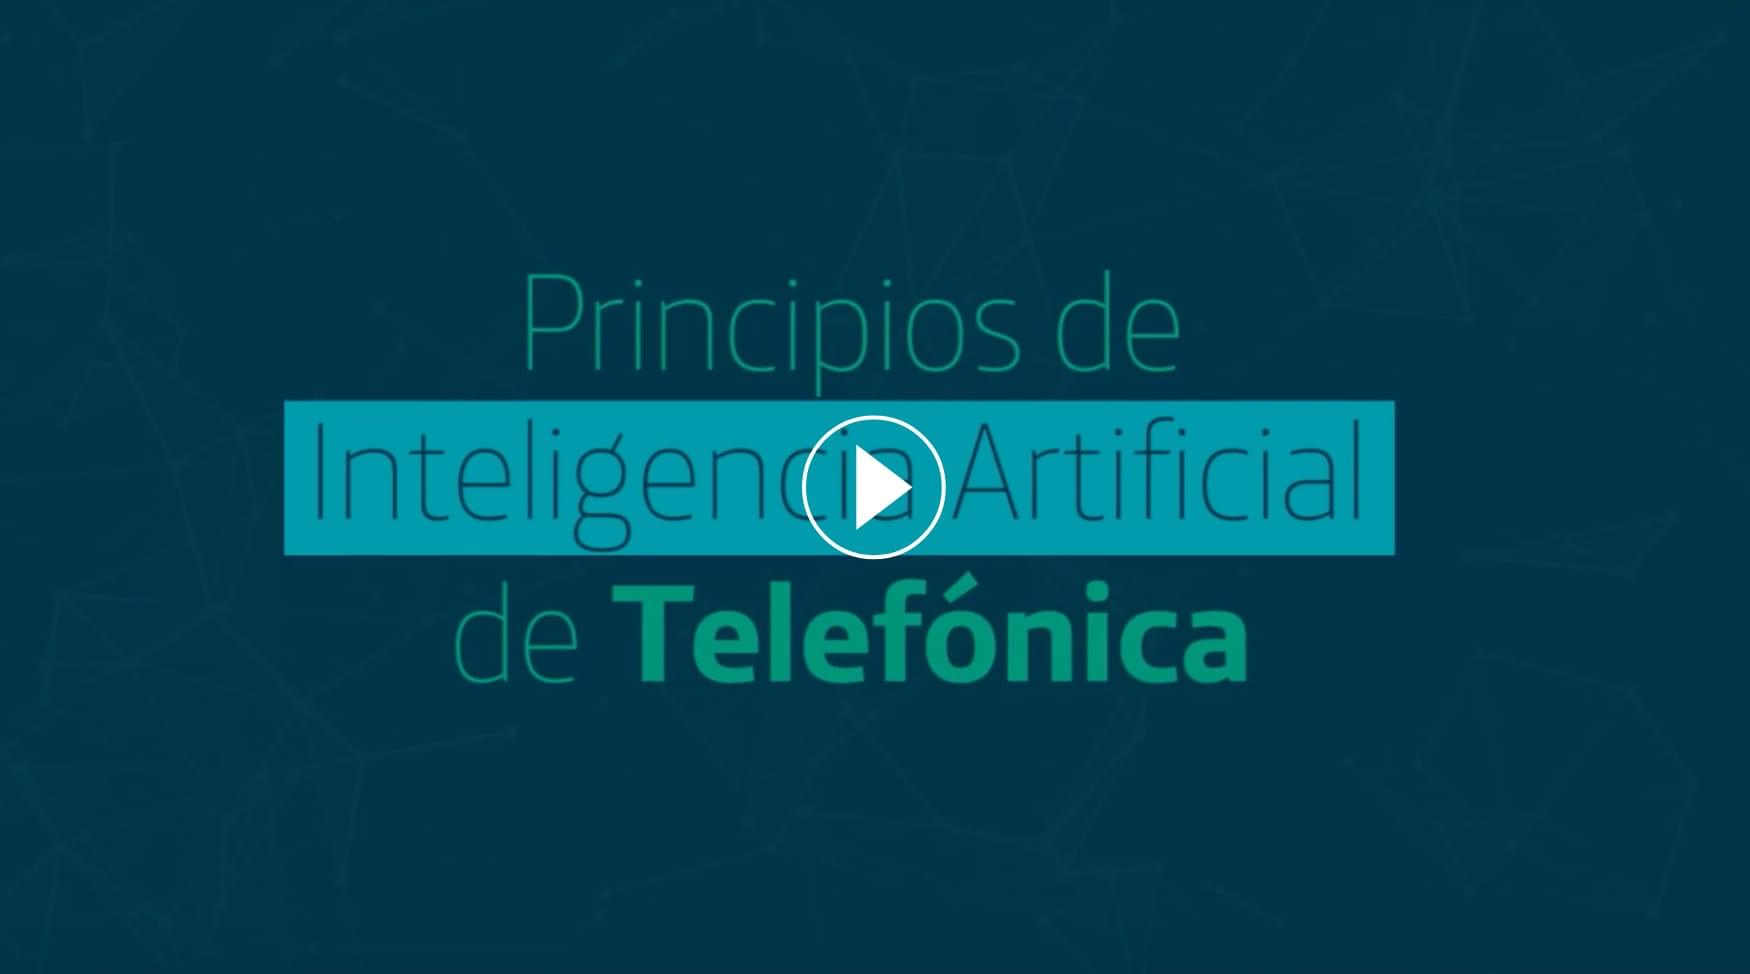 At Telefónica we work with responsible AI principles.